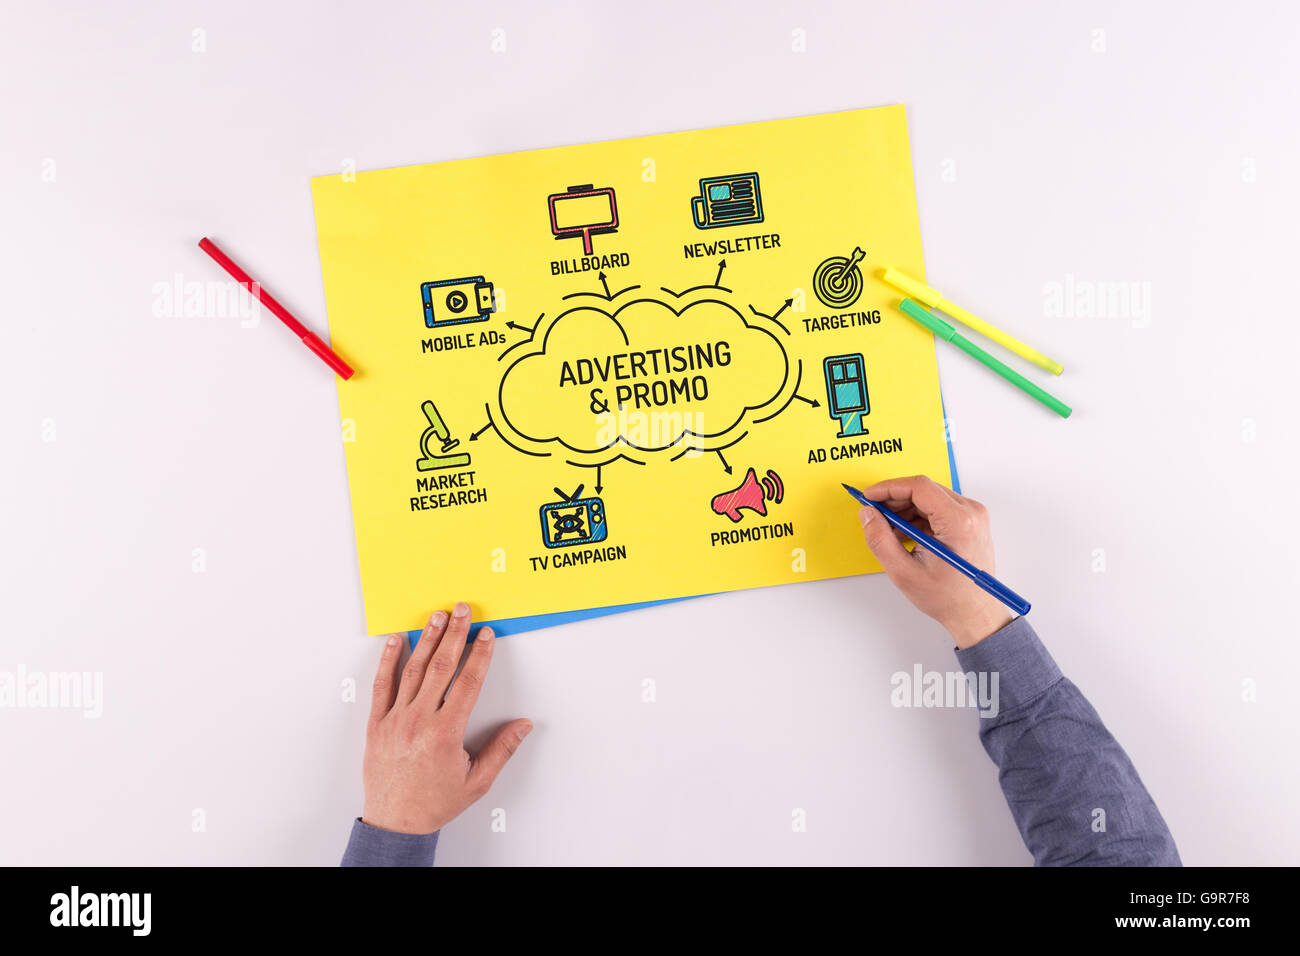 Advertising and Promo chart with keywords and sketch icons Stock Photo